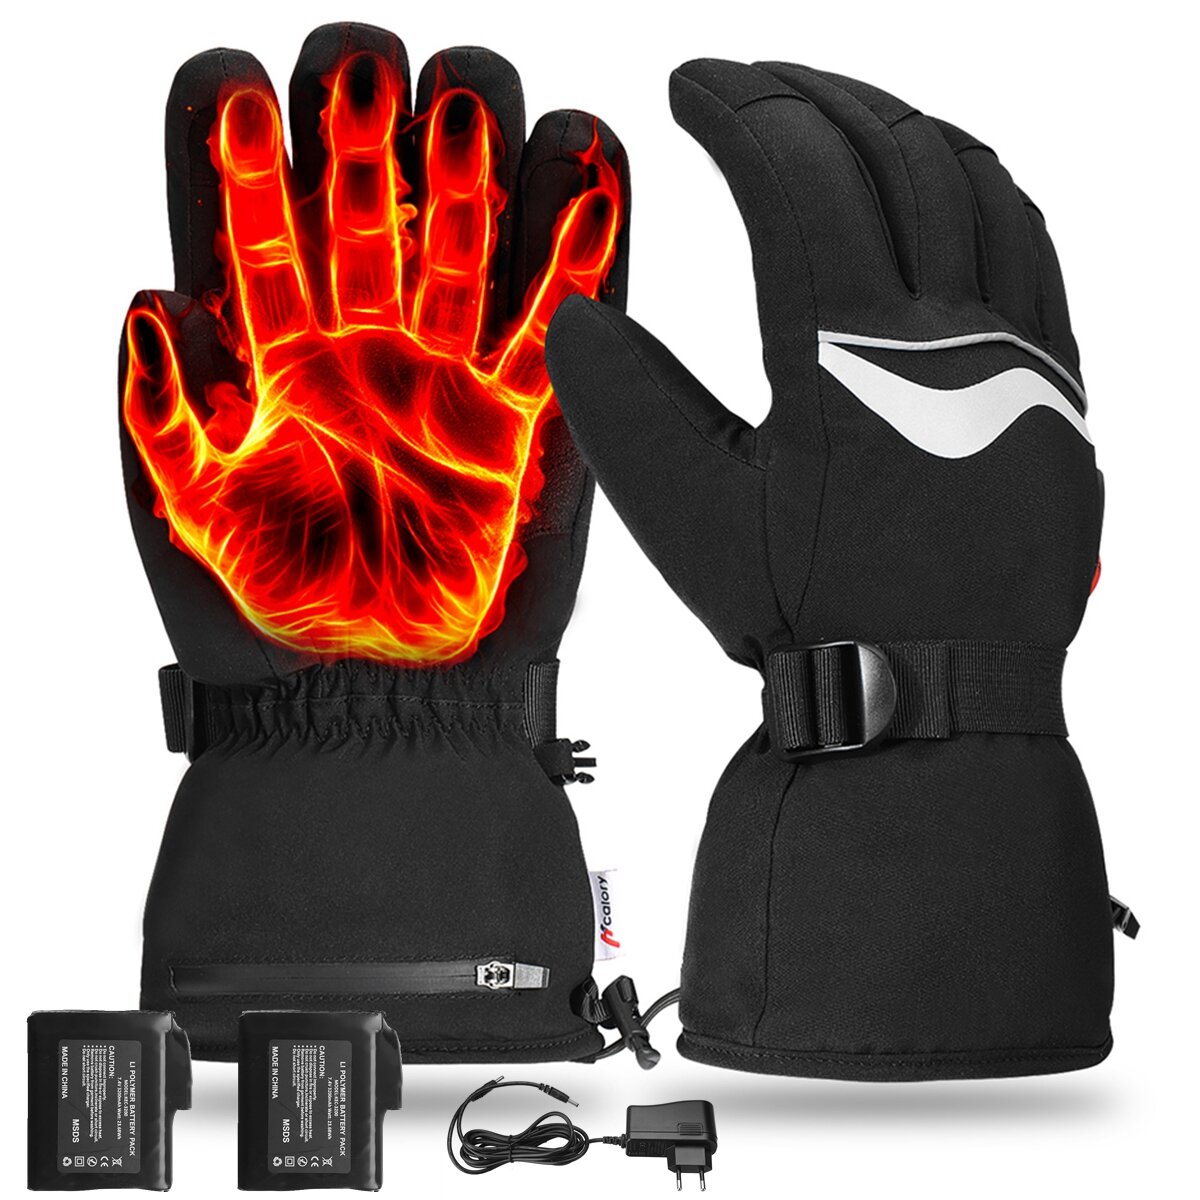 Hcalory 45/55/65℃ 1Pair Black Electric Heated Gloves Waterproof Warm Gloves for Outdoor Sports